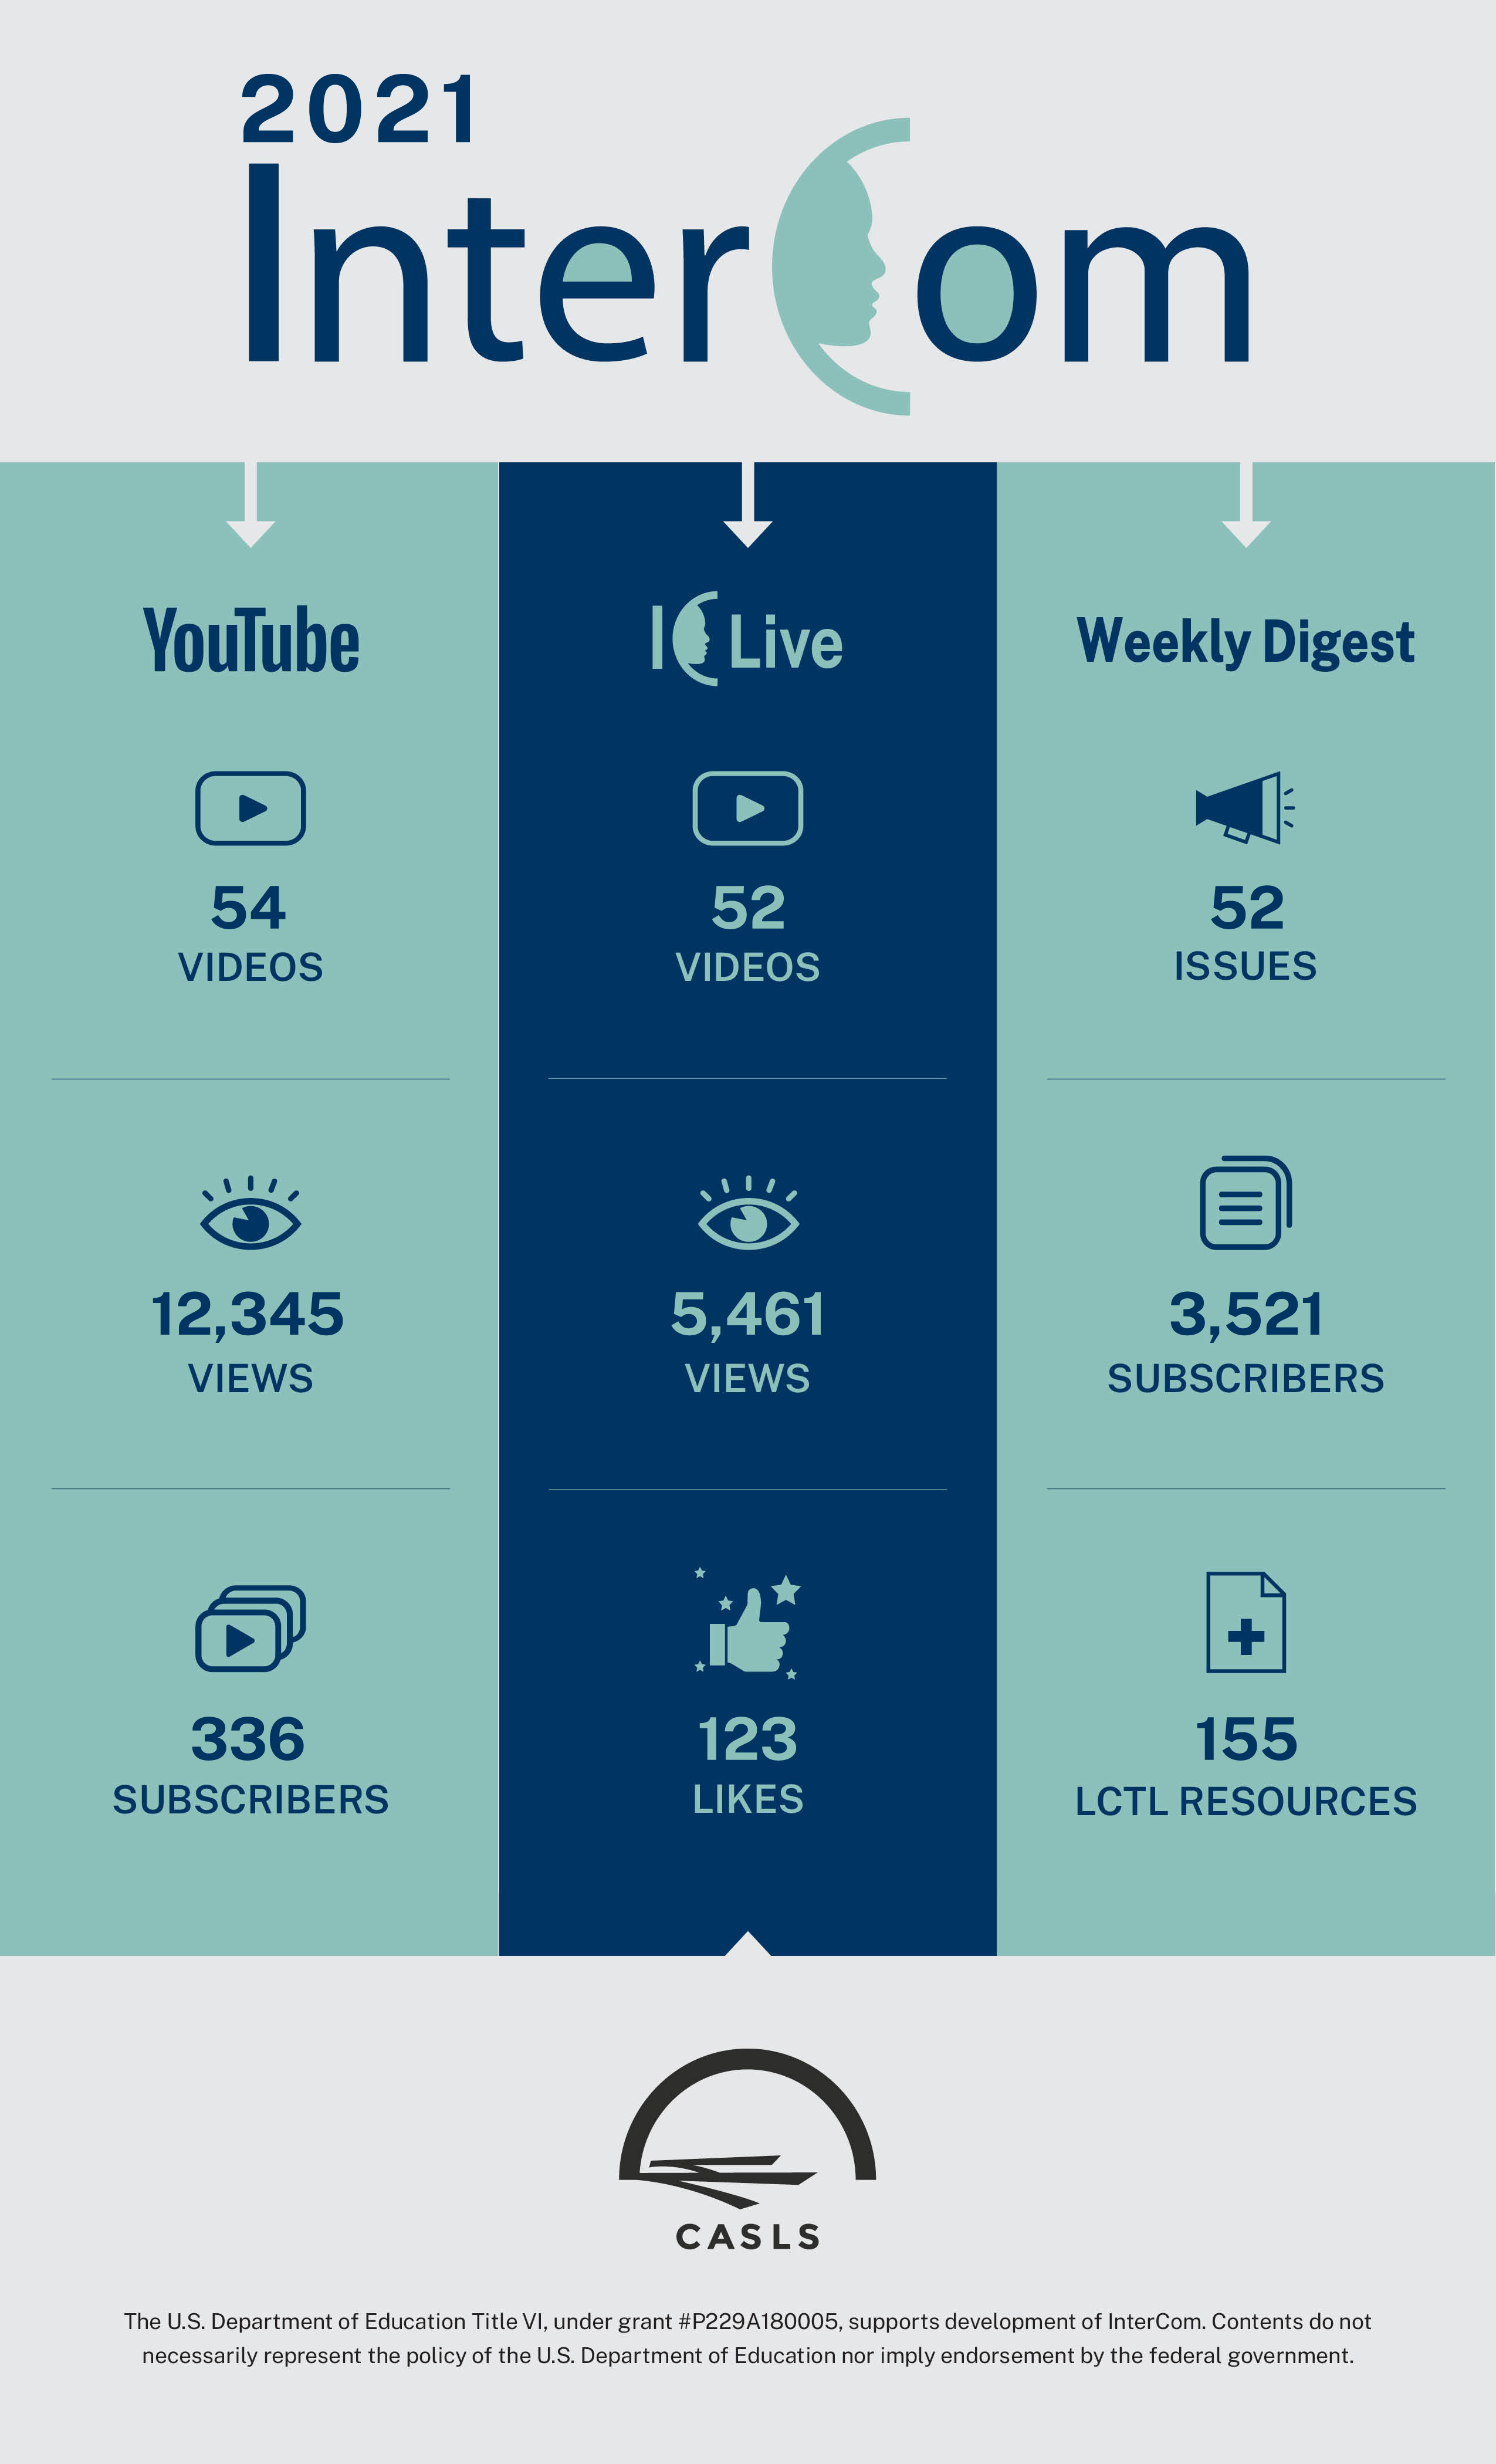 Infographic with numbers about youtube channel views, likes, and intercom live interactions.